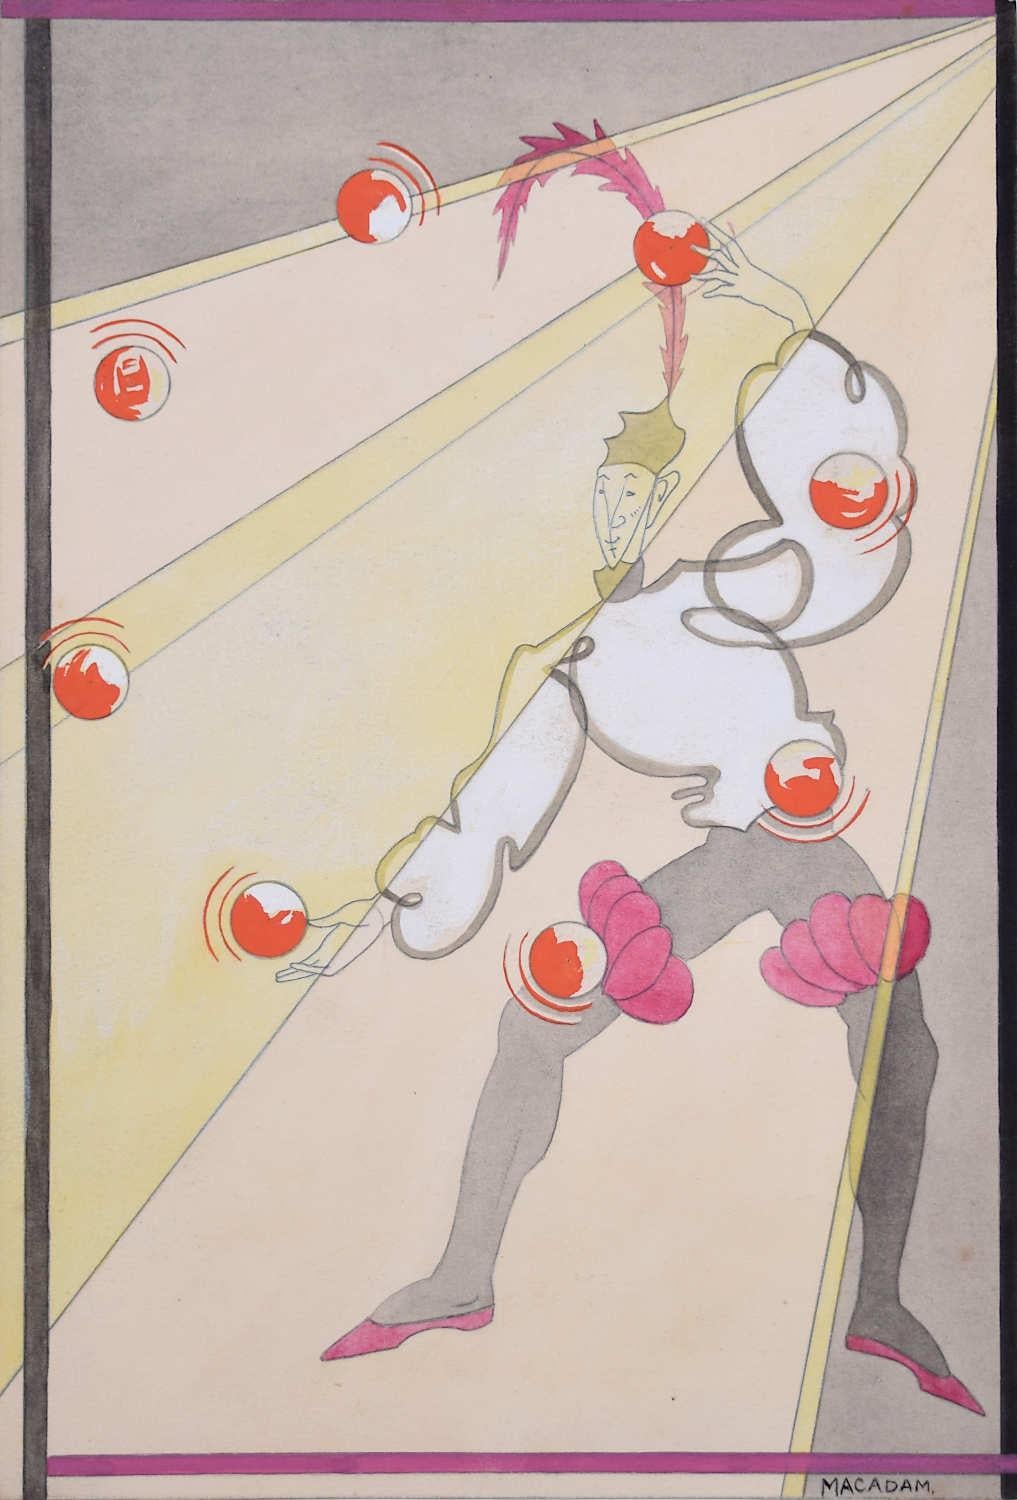 To see our other Modern British Art, scroll down to "More from this Seller" and below it click on "See all from this Seller" - or send us a message if you cannot find the artist you want.

Margaret Macadam (1902-1991)
Juggler (c.1930)
Mixed media on